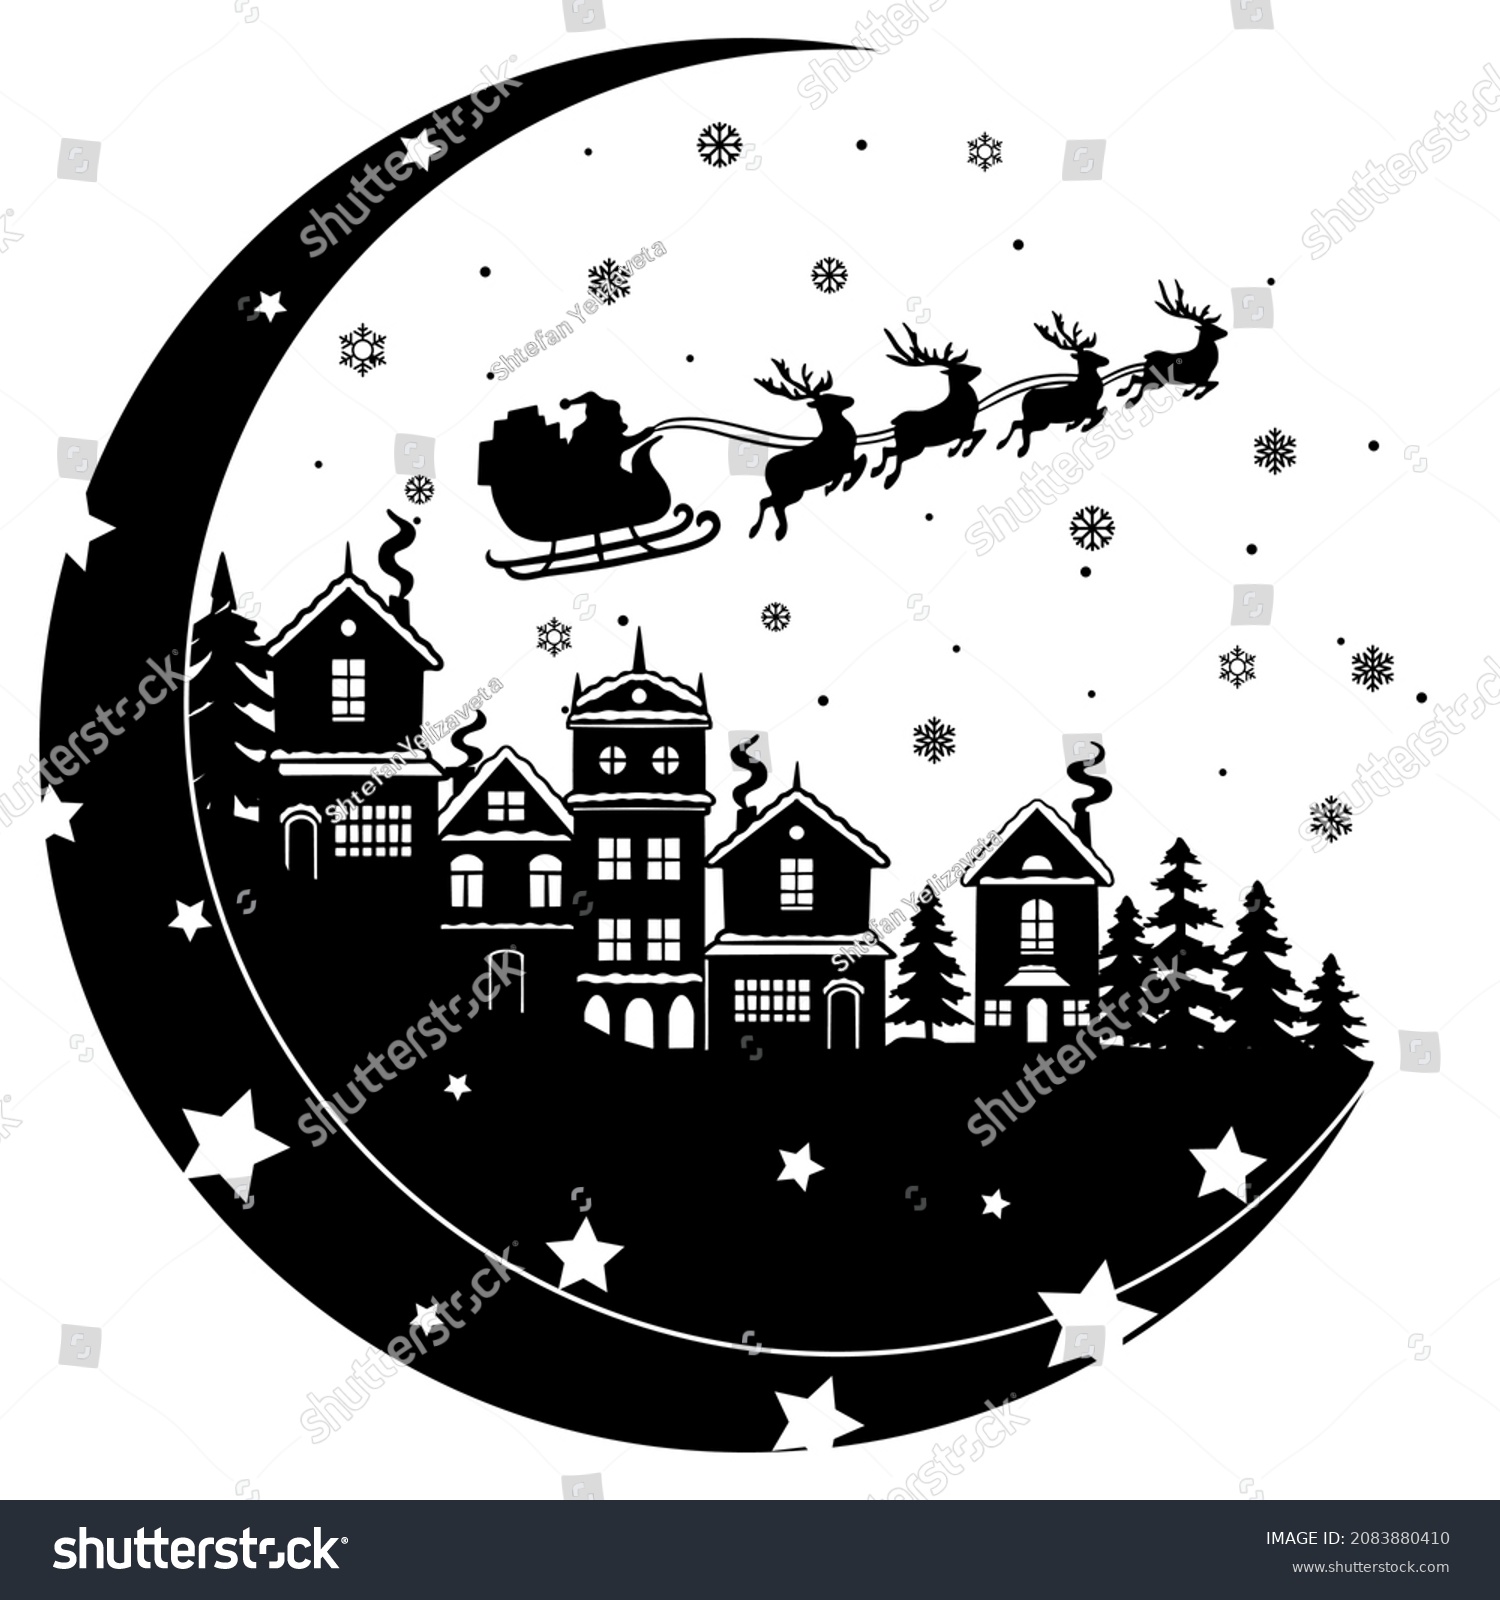 SVG of Christmas scene. Santa Claus flies over houses in a sleigh. Santa's cart with reindeer. Cutting paper file svg